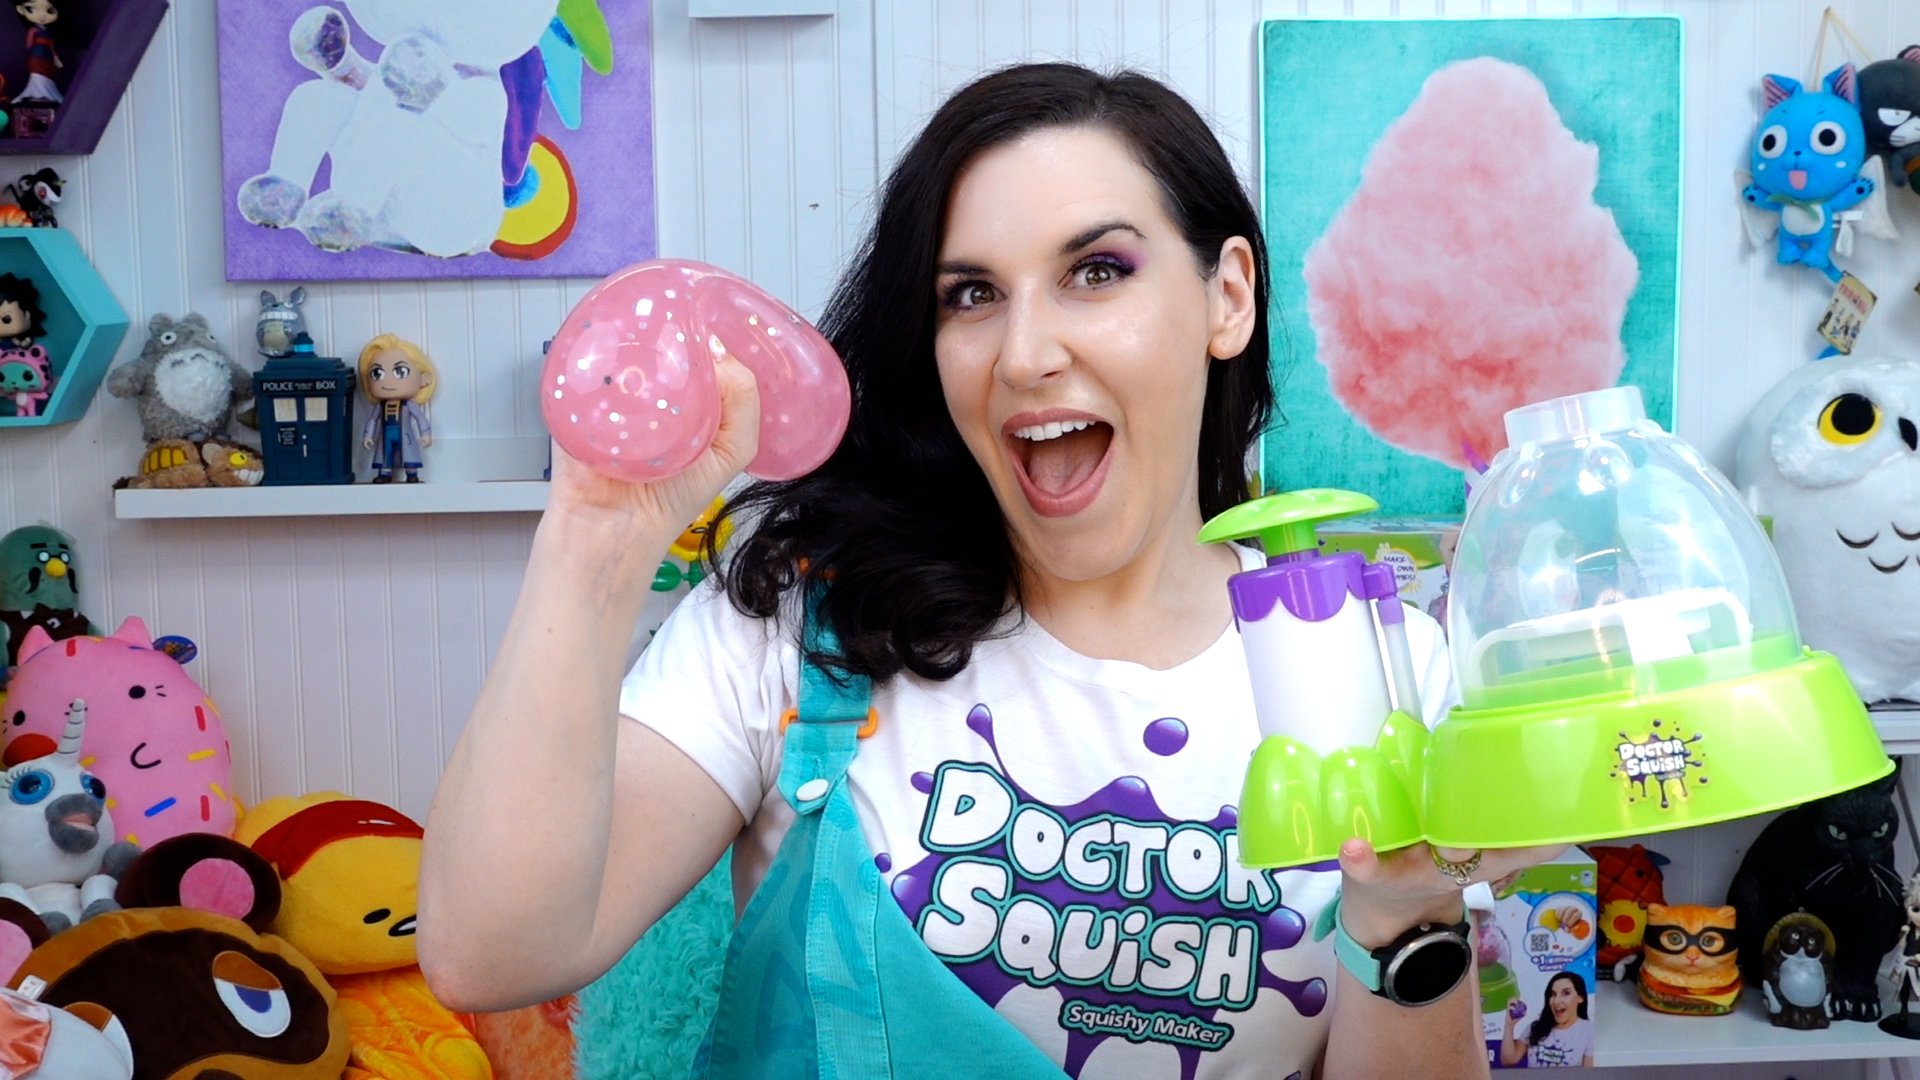 Let your child's creativity run wild with Doctor Squish Squishy